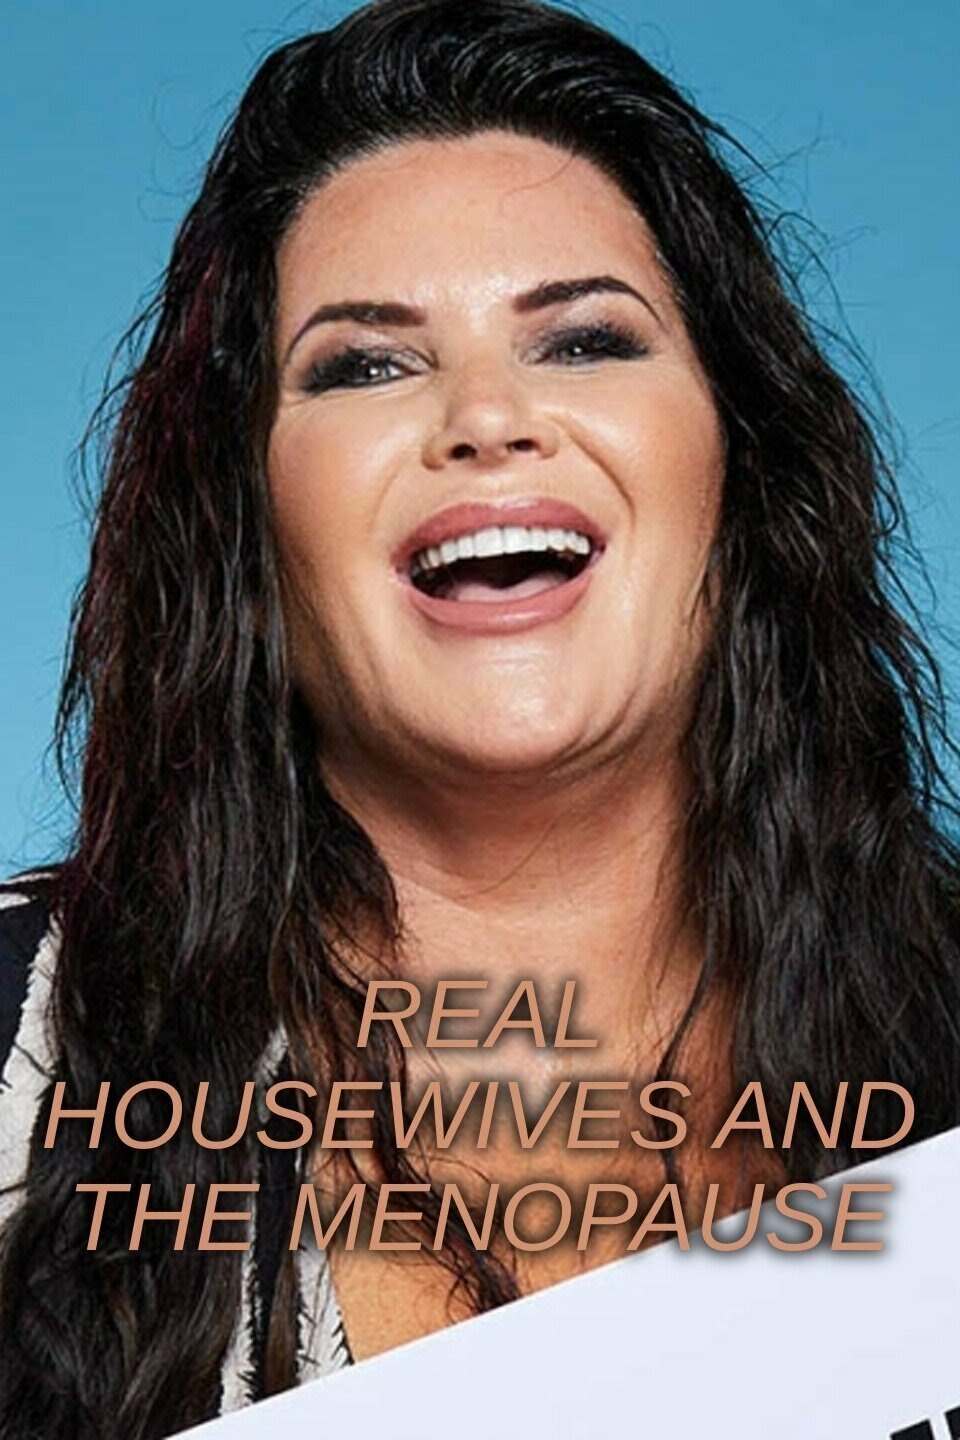 Real Housewives and the Menopause ne zaman